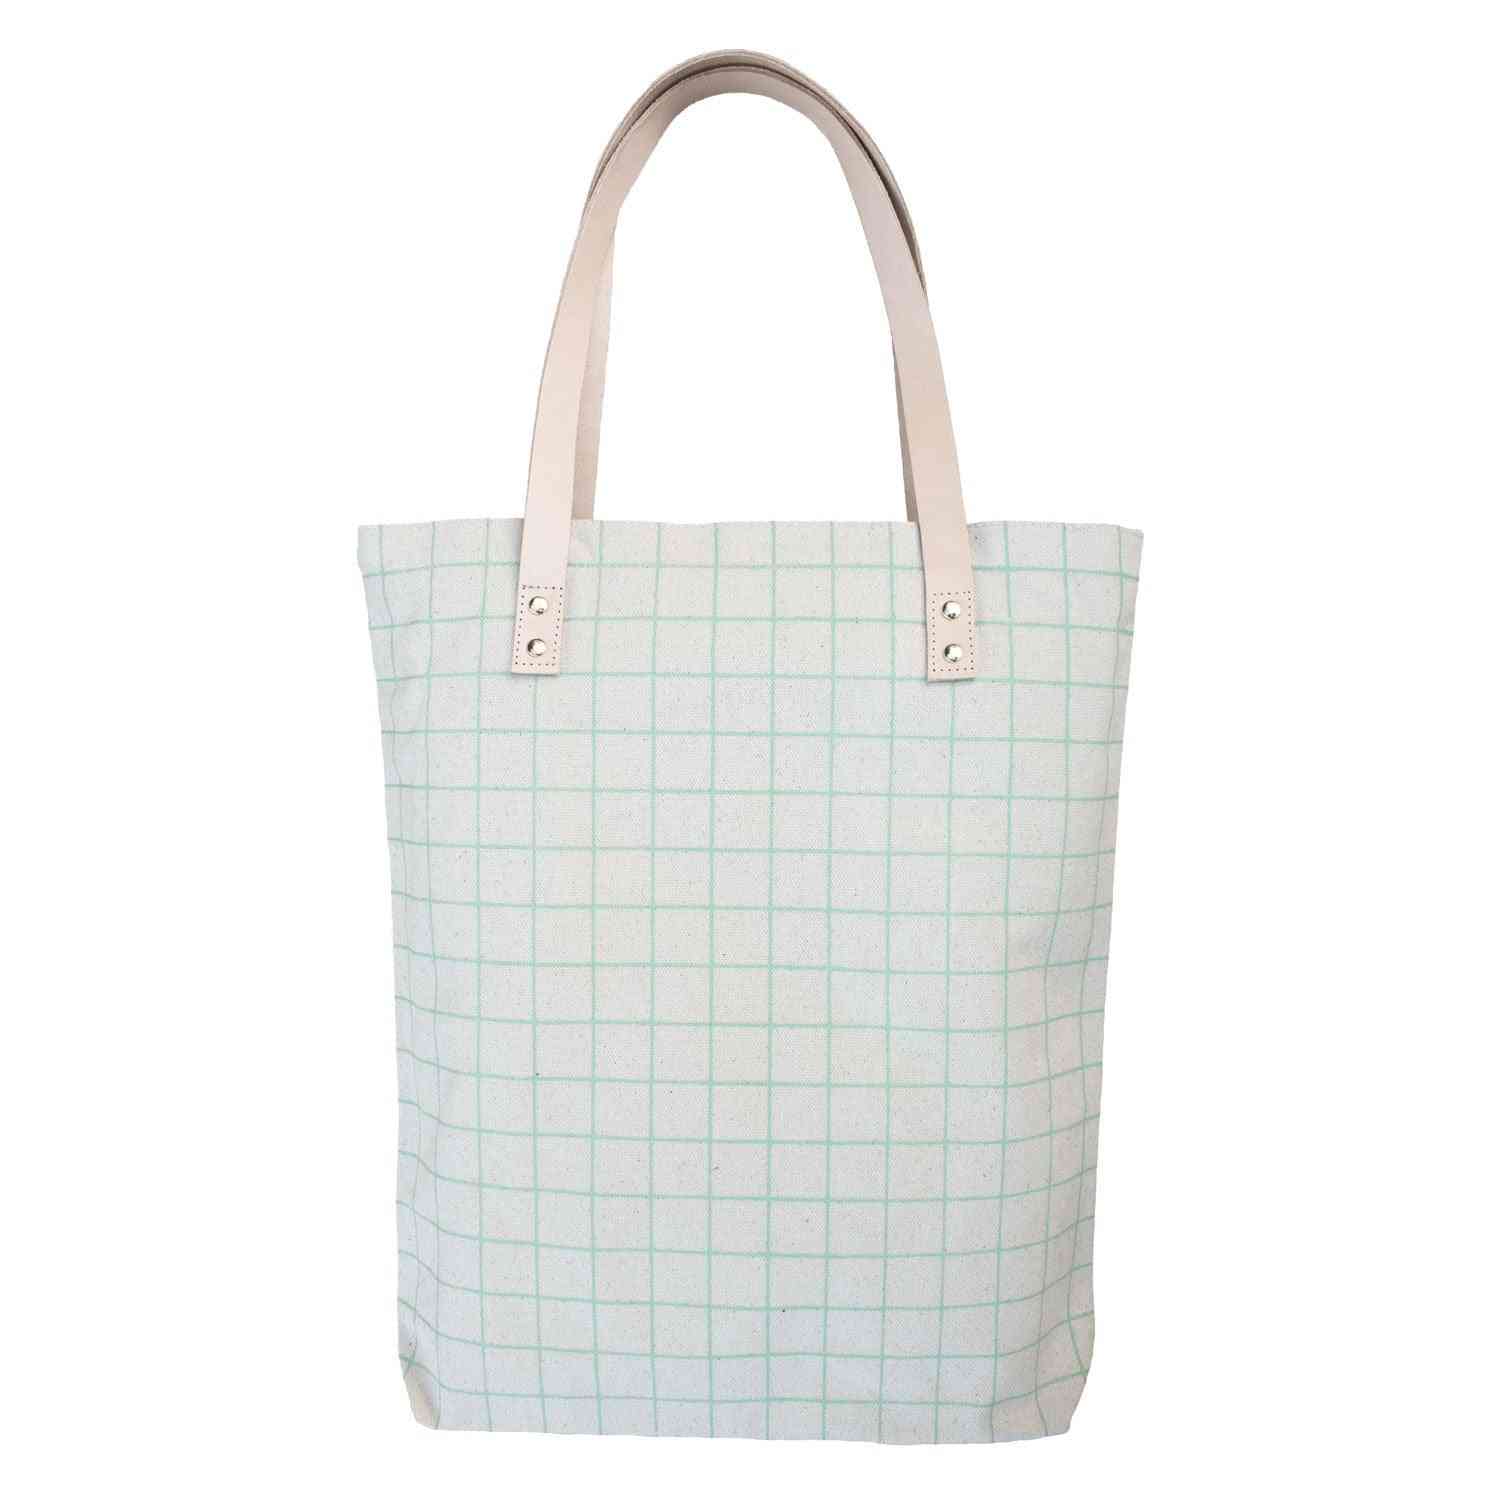 Cotton Canvas Tote Bag With Leather Straps